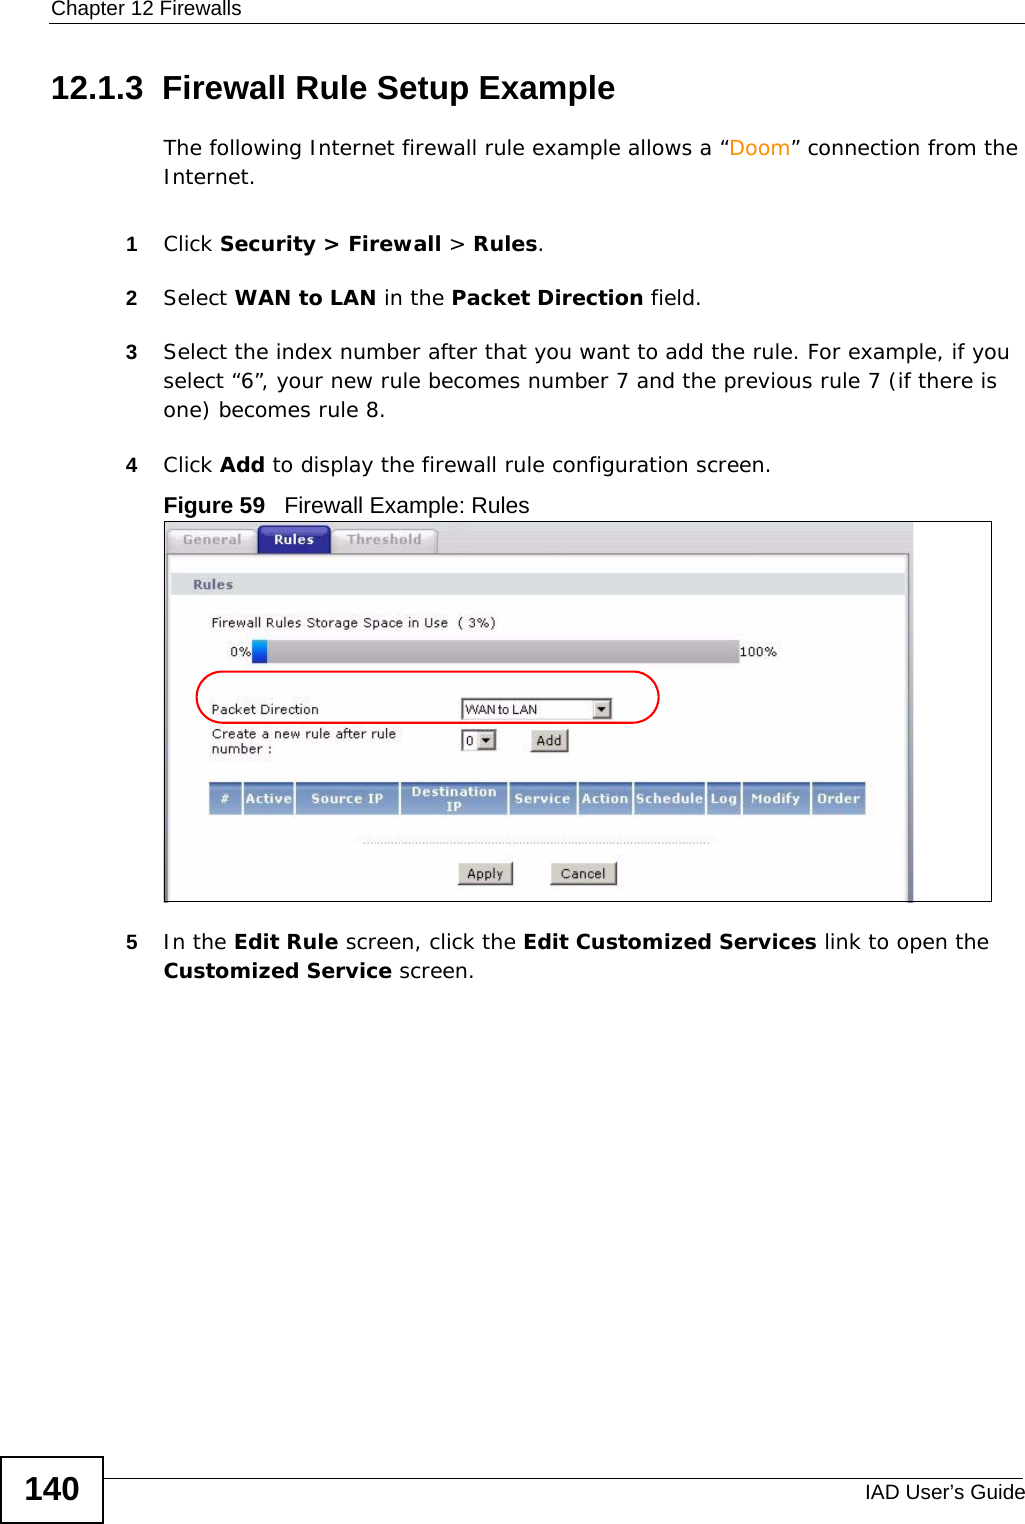 Chapter 12 FirewallsIAD User’s Guide14012.1.3  Firewall Rule Setup Example The following Internet firewall rule example allows a “Doom” connection from the Internet.1Click Security &gt; Firewall &gt; Rules.2Select WAN to LAN in the Packet Direction field. 3Select the index number after that you want to add the rule. For example, if you select “6”, your new rule becomes number 7 and the previous rule 7 (if there is one) becomes rule 8.4Click Add to display the firewall rule configuration screen.Figure 59   Firewall Example: Rules5In the Edit Rule screen, click the Edit Customized Services link to open the Customized Service screen. 